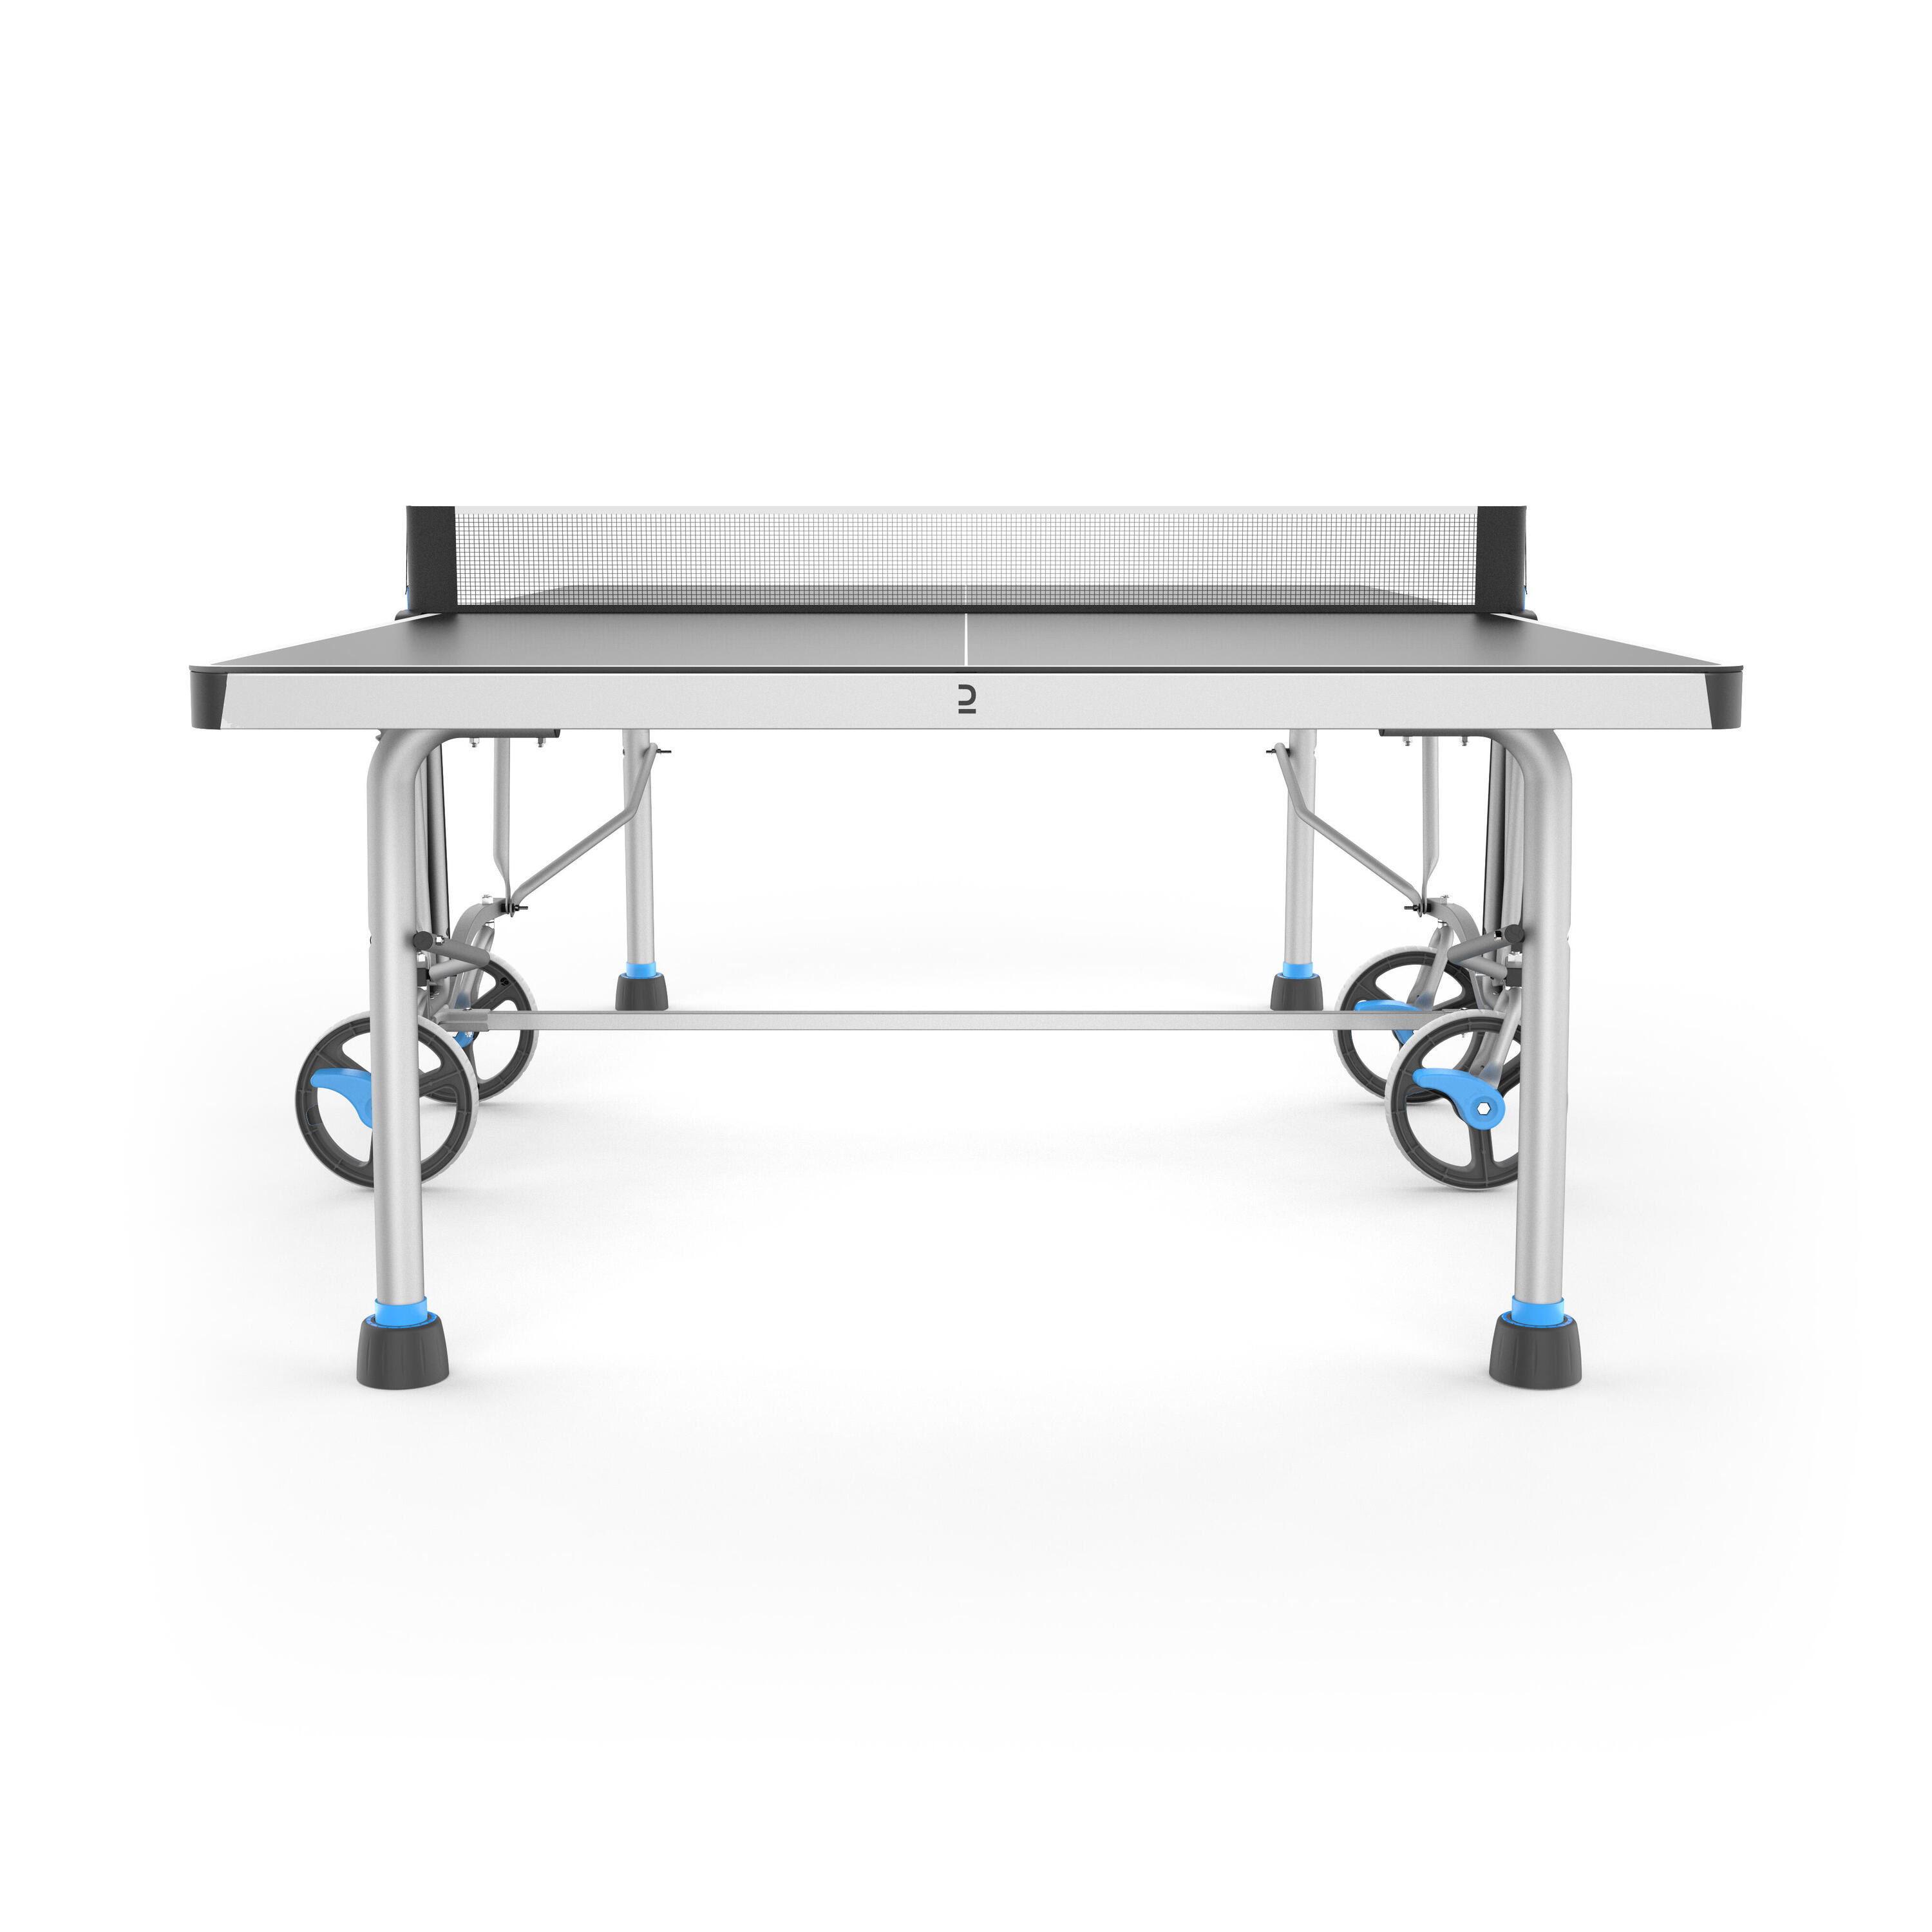 Outdoor Table Tennis Table PPT 900.2 - Grey 14/15